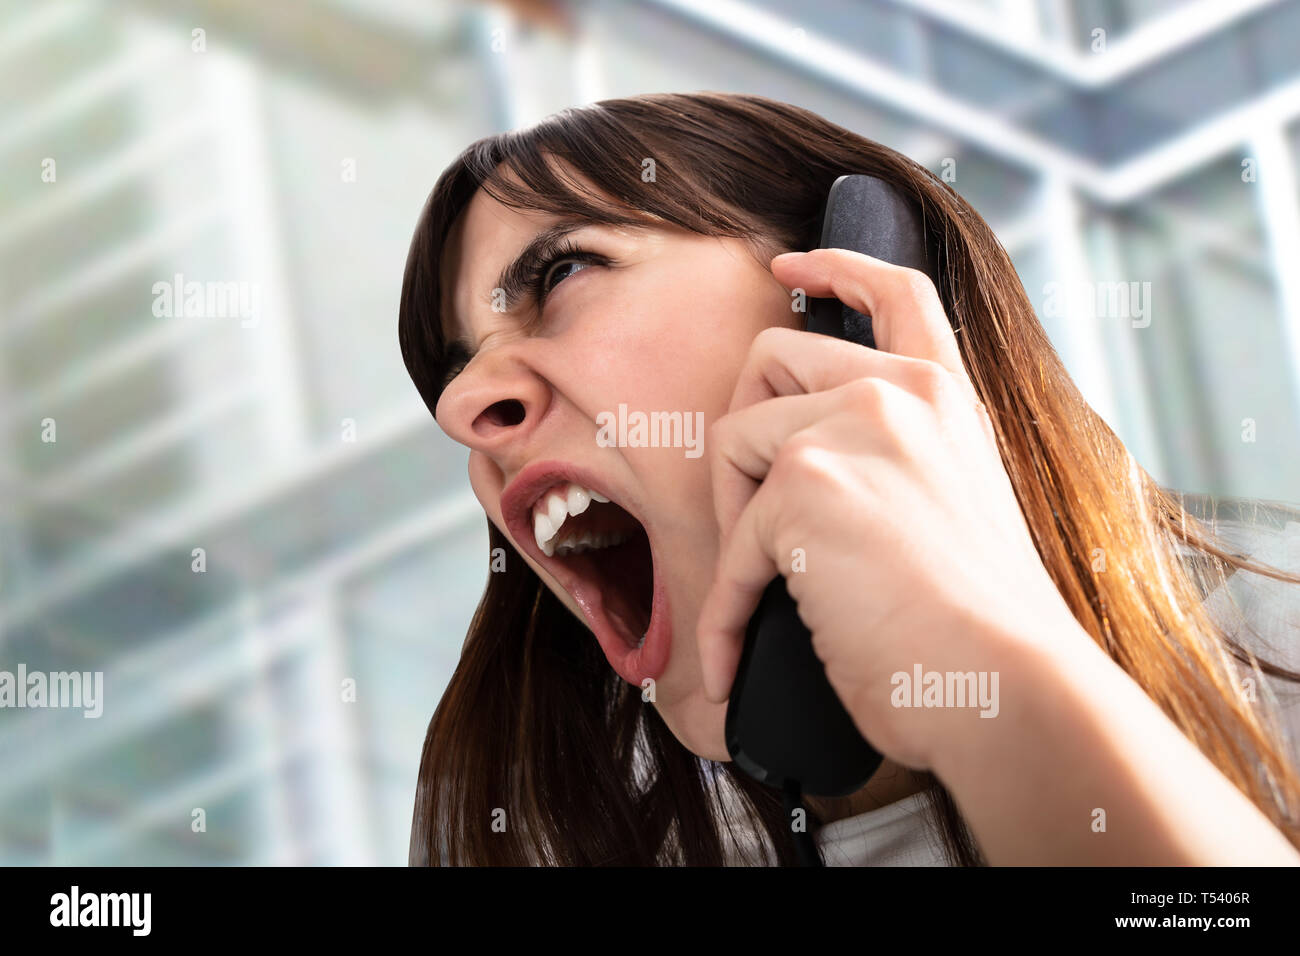 Close-up Of Frustrated Businesswoman Yelling On Phone Stock Photo